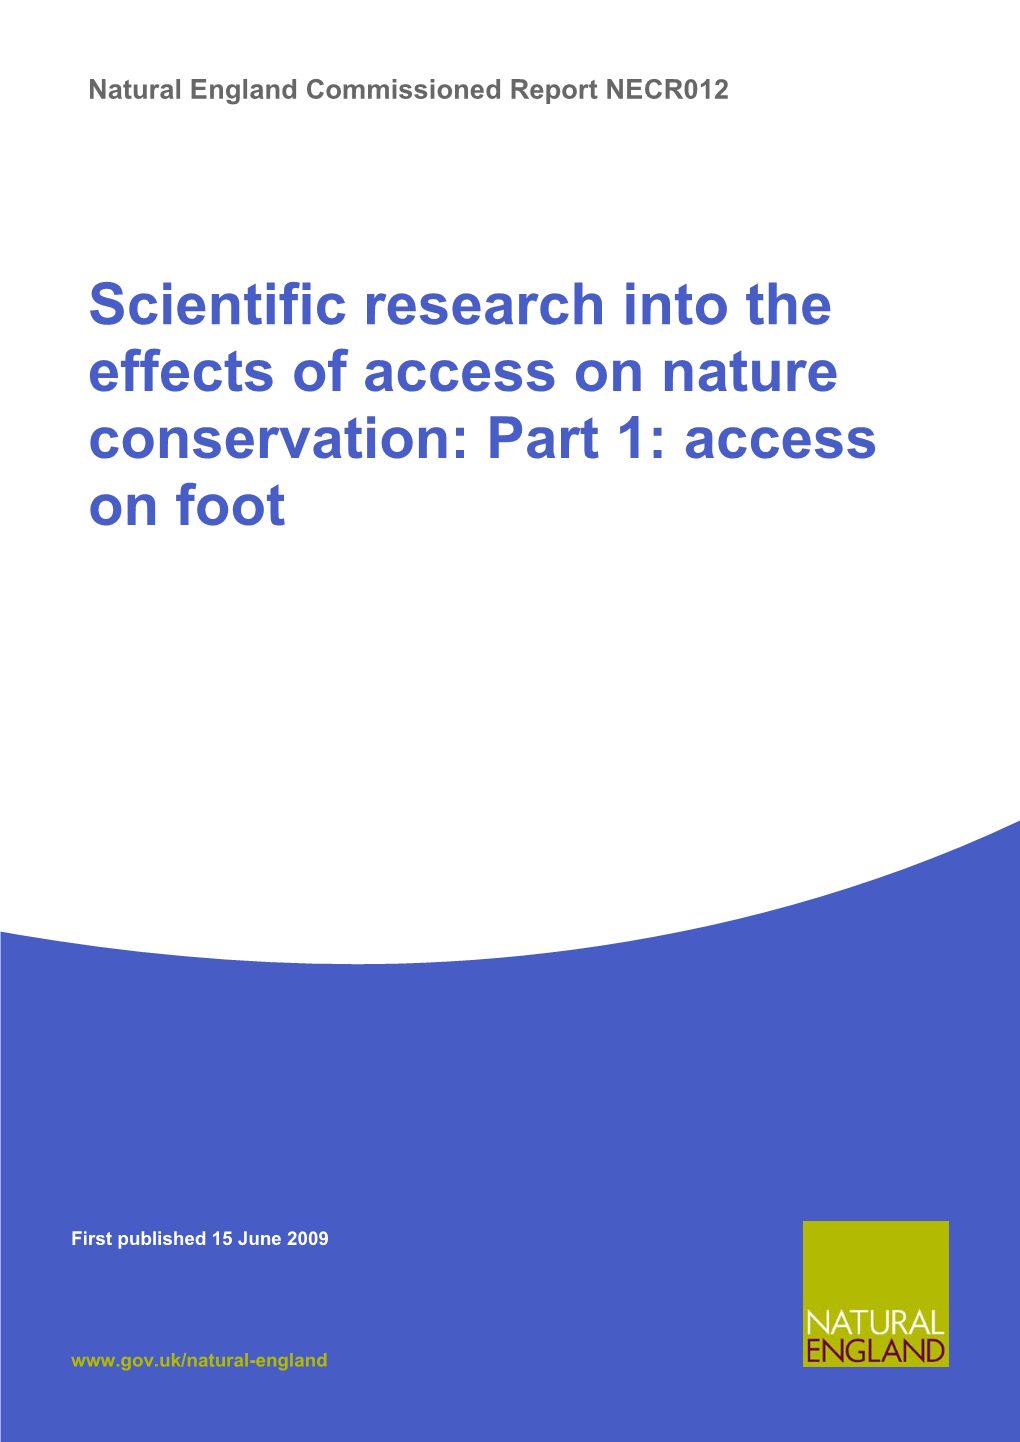 Scientific Research Into the Effects of Access on Nature Conservation: Part 1: Access on Foot